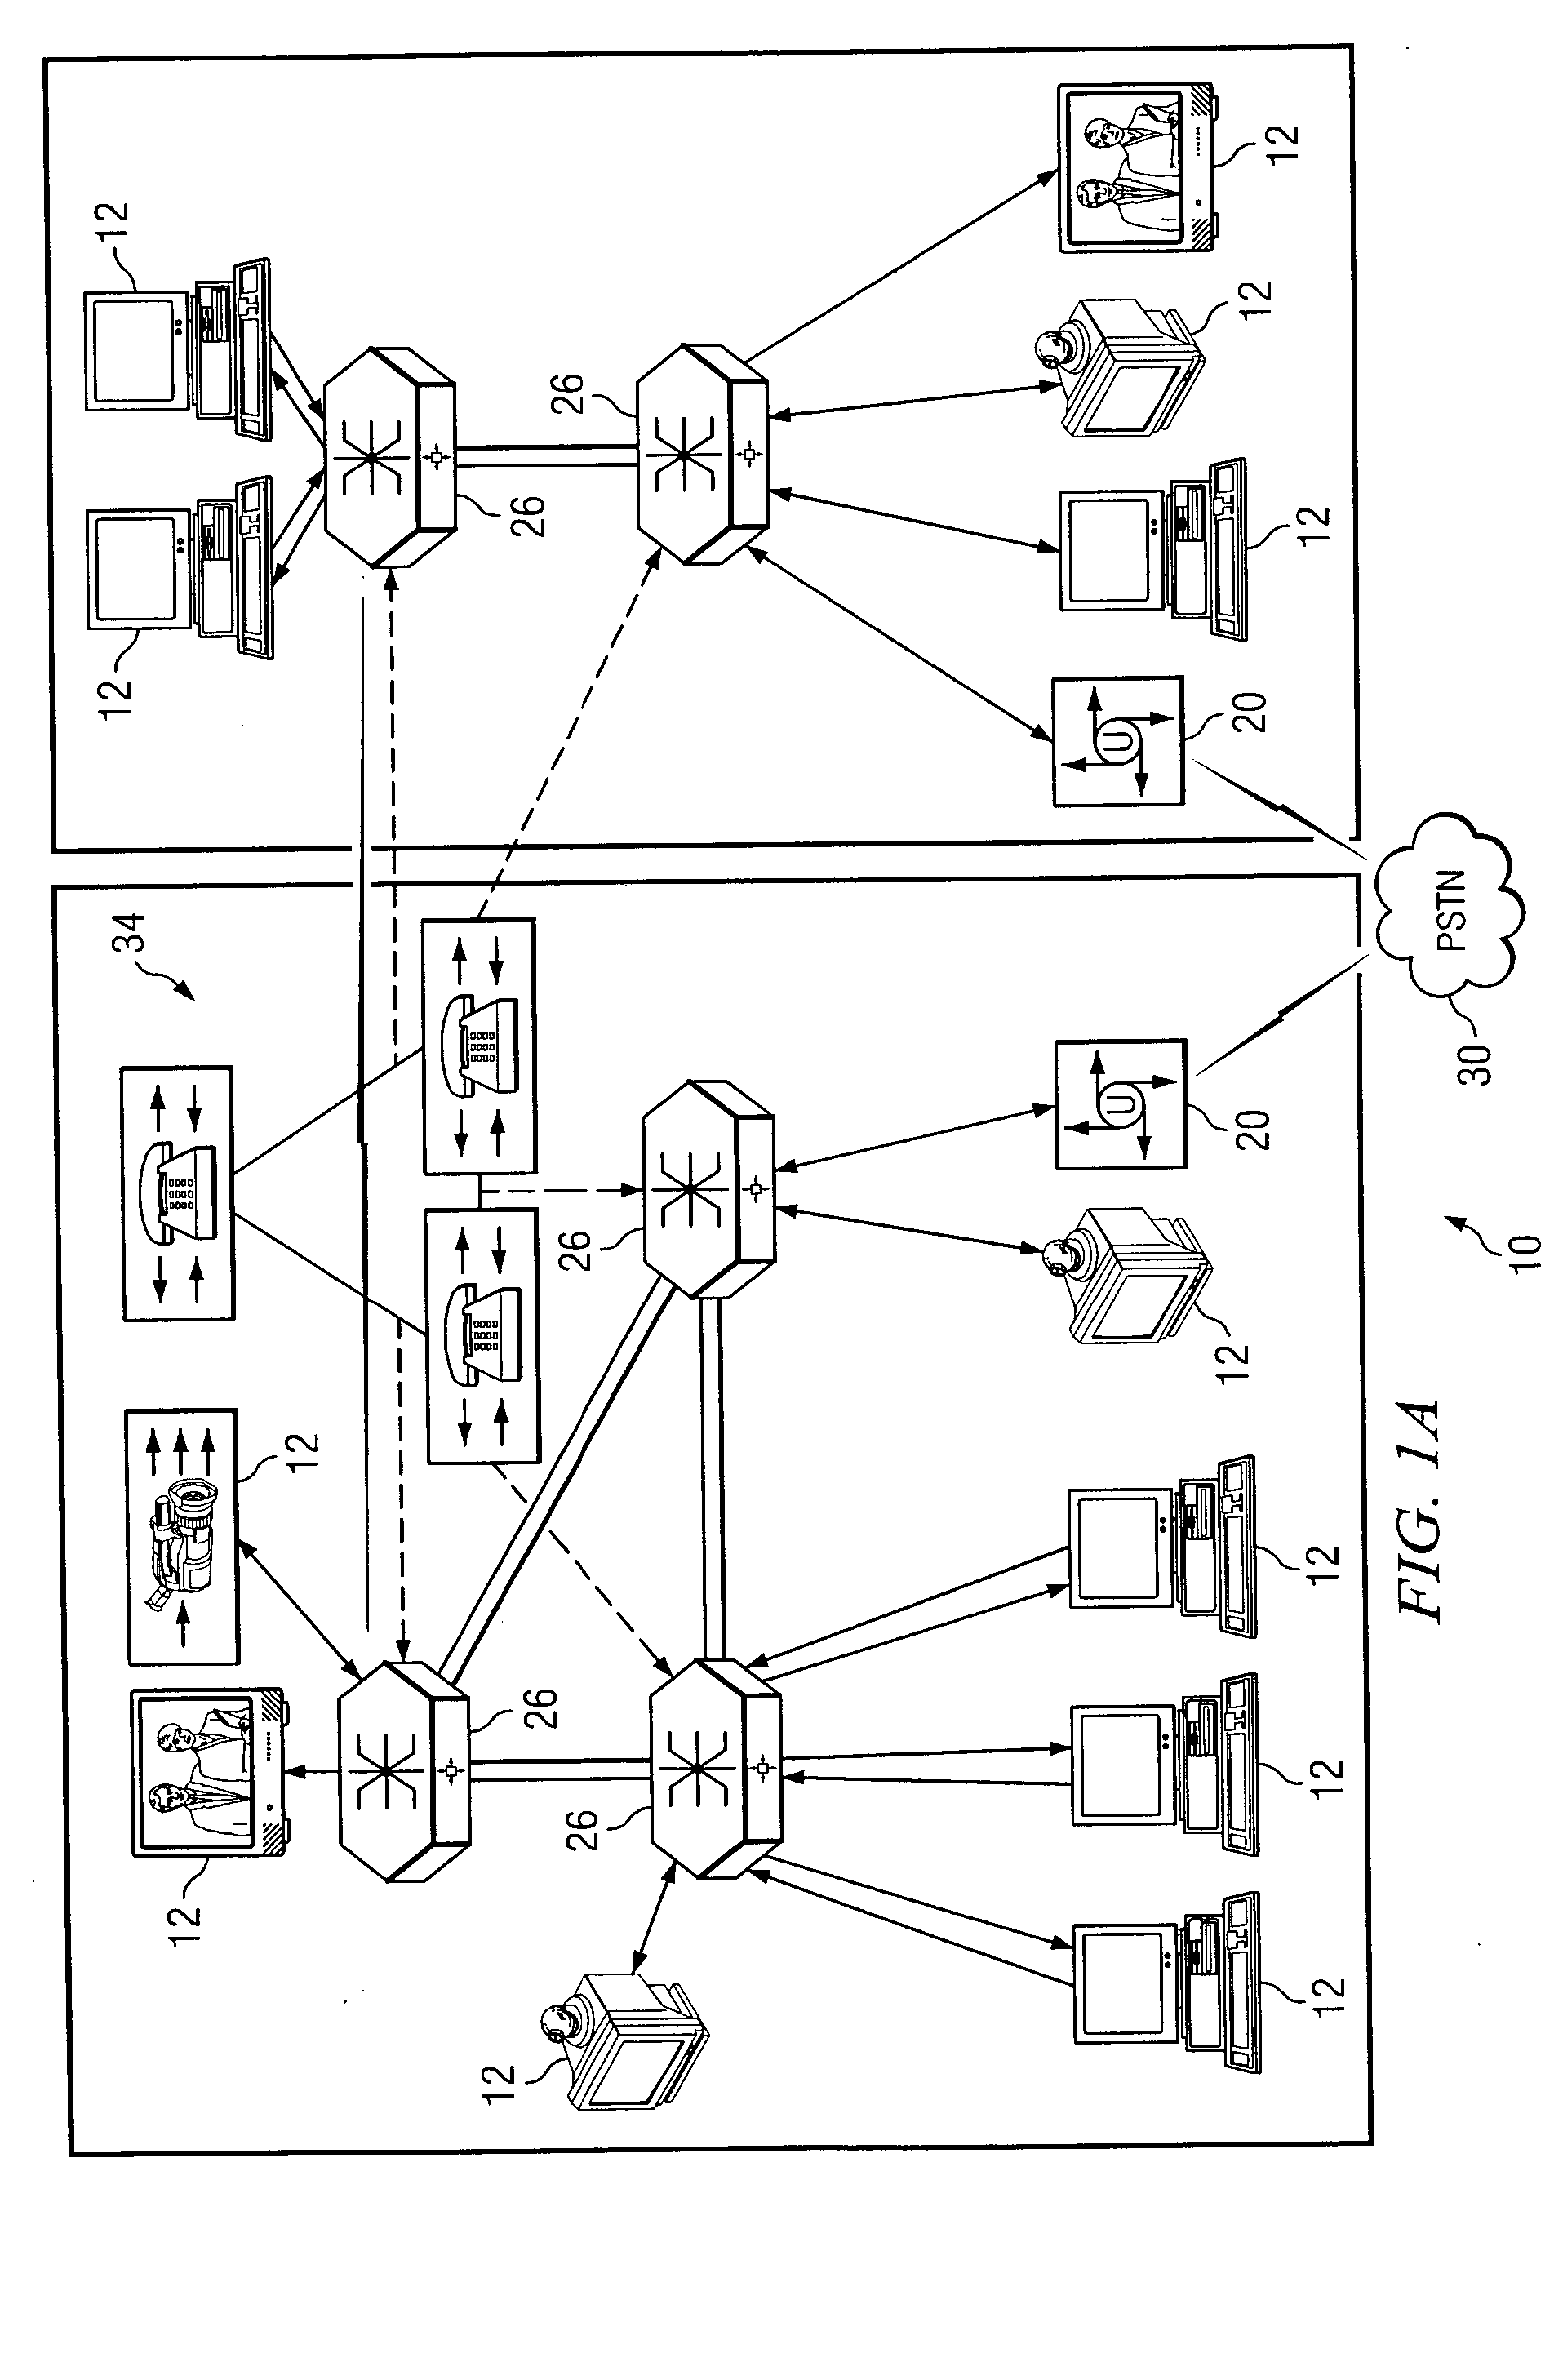 System and method for performing distributed video conferencing